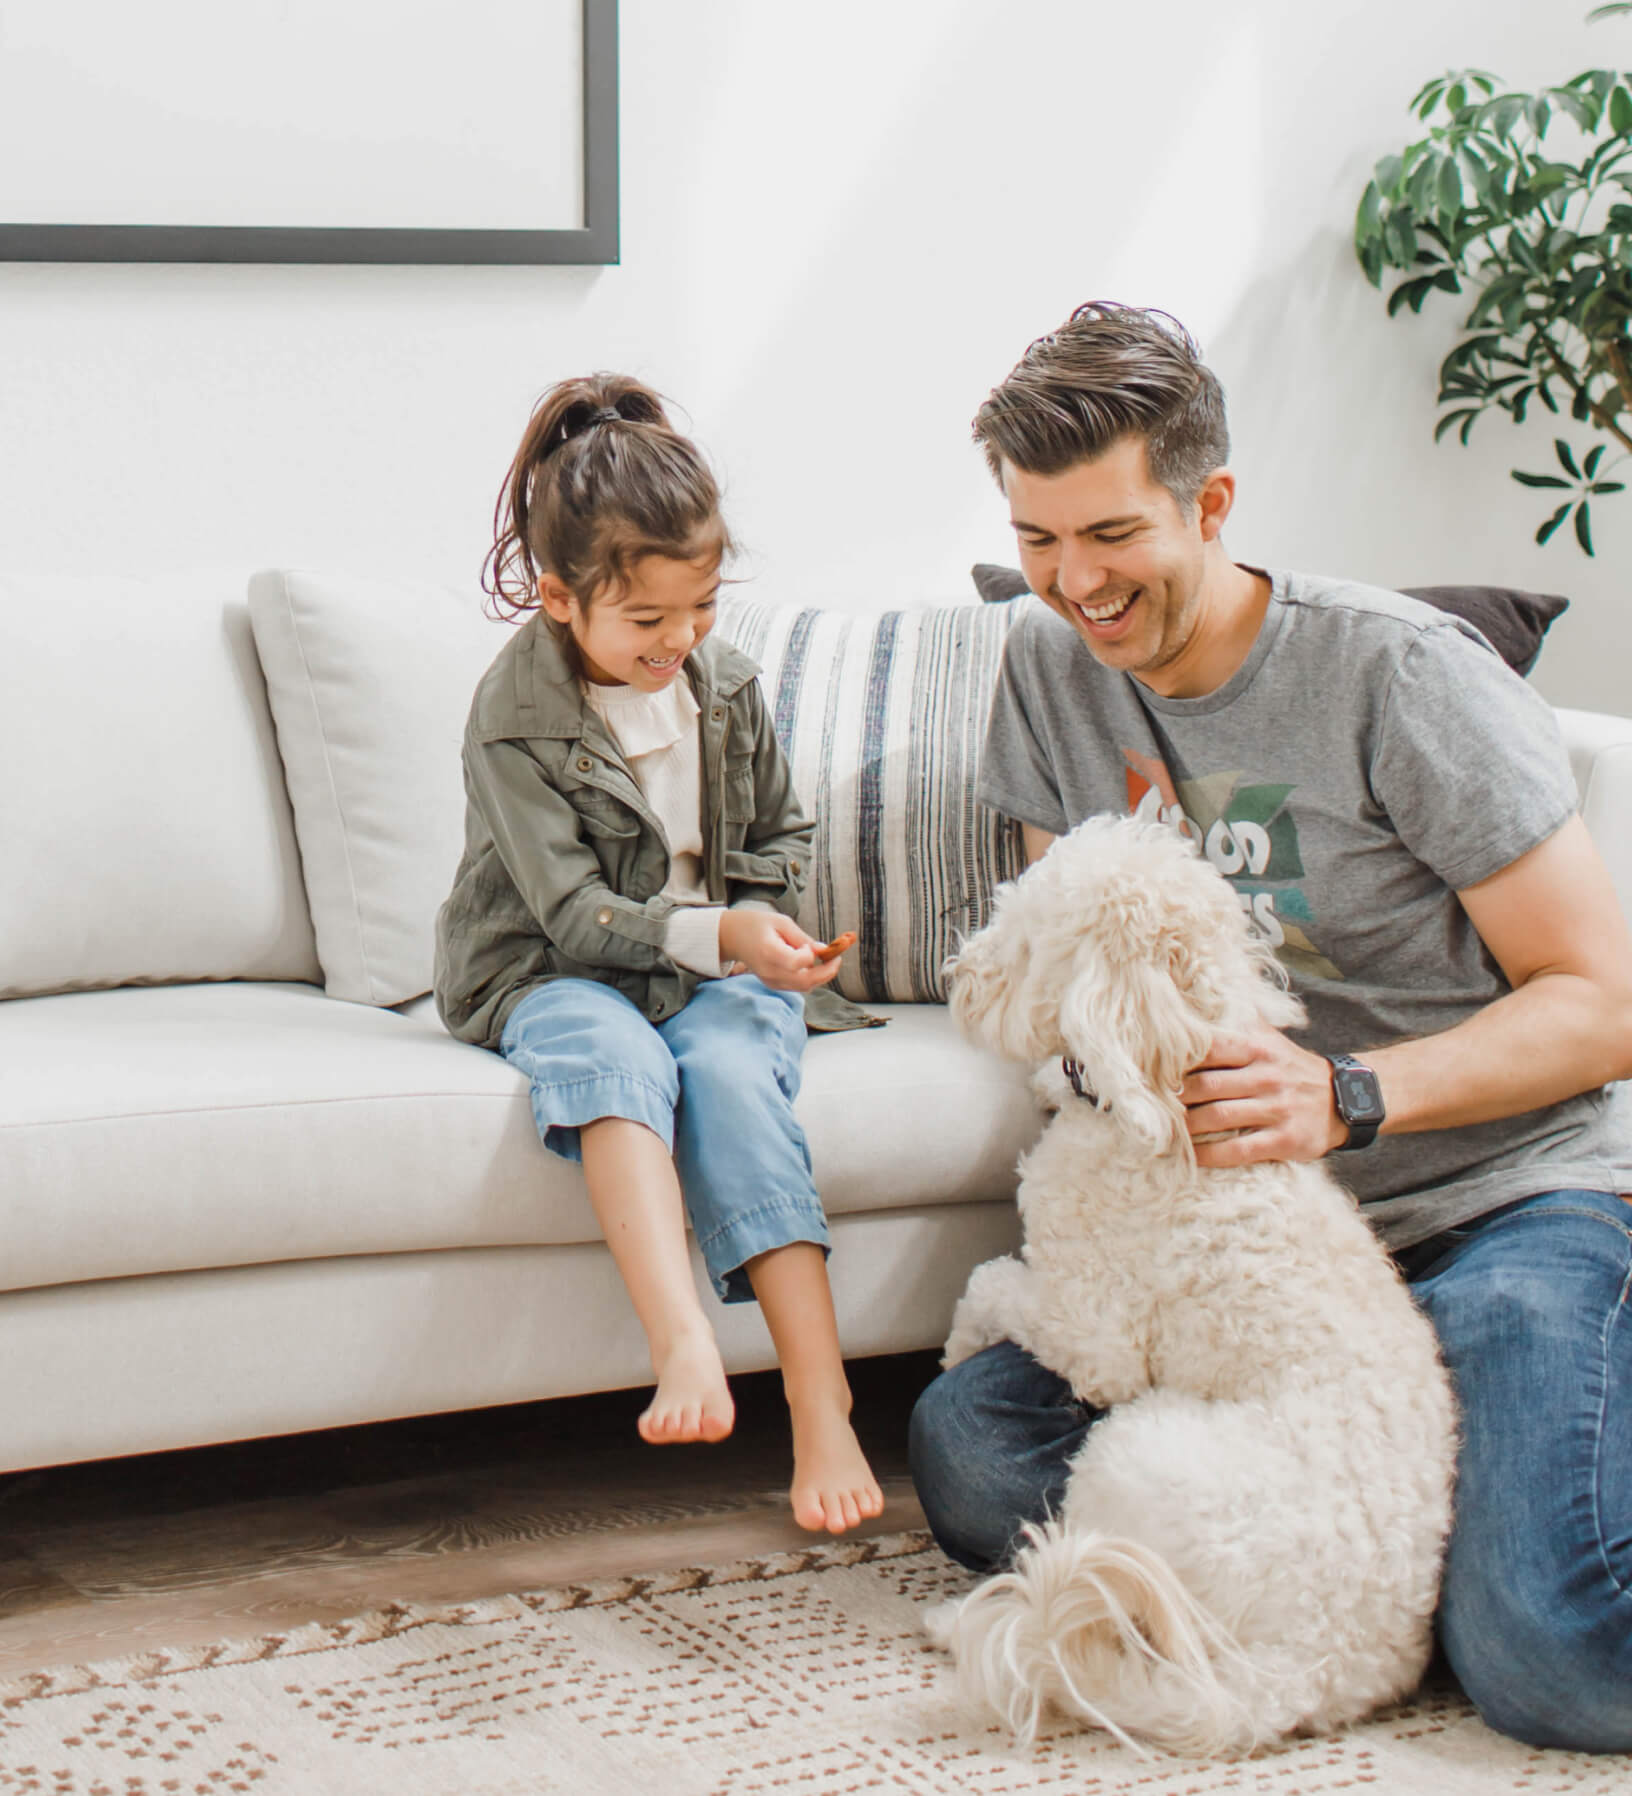 Daughter and father with white dog on white dekayess sofa